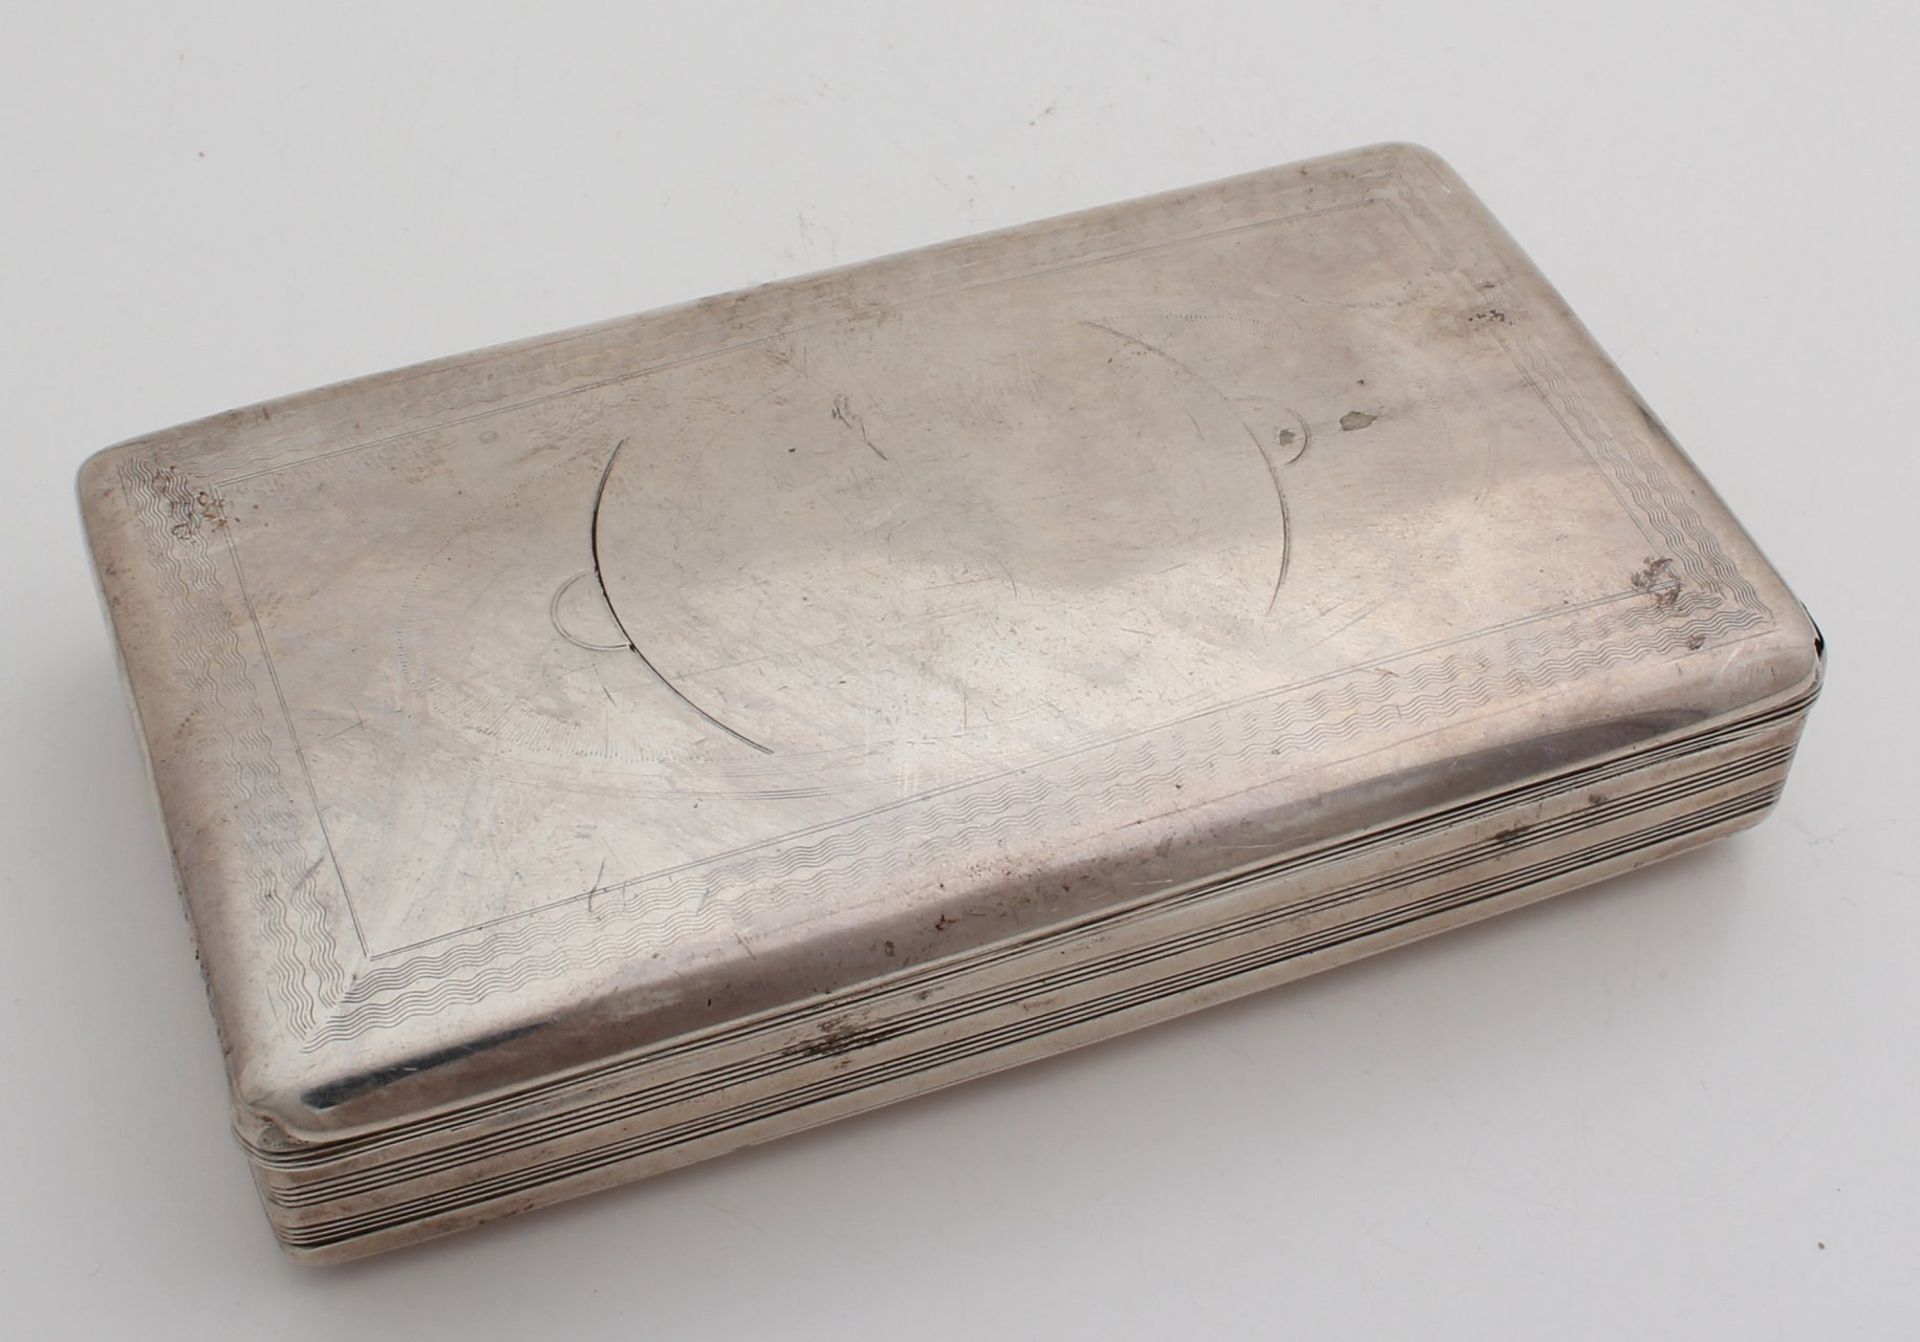 Silver spoon box, 835/000, with beautiful engravings. Box equipped with an Empire engraving and line